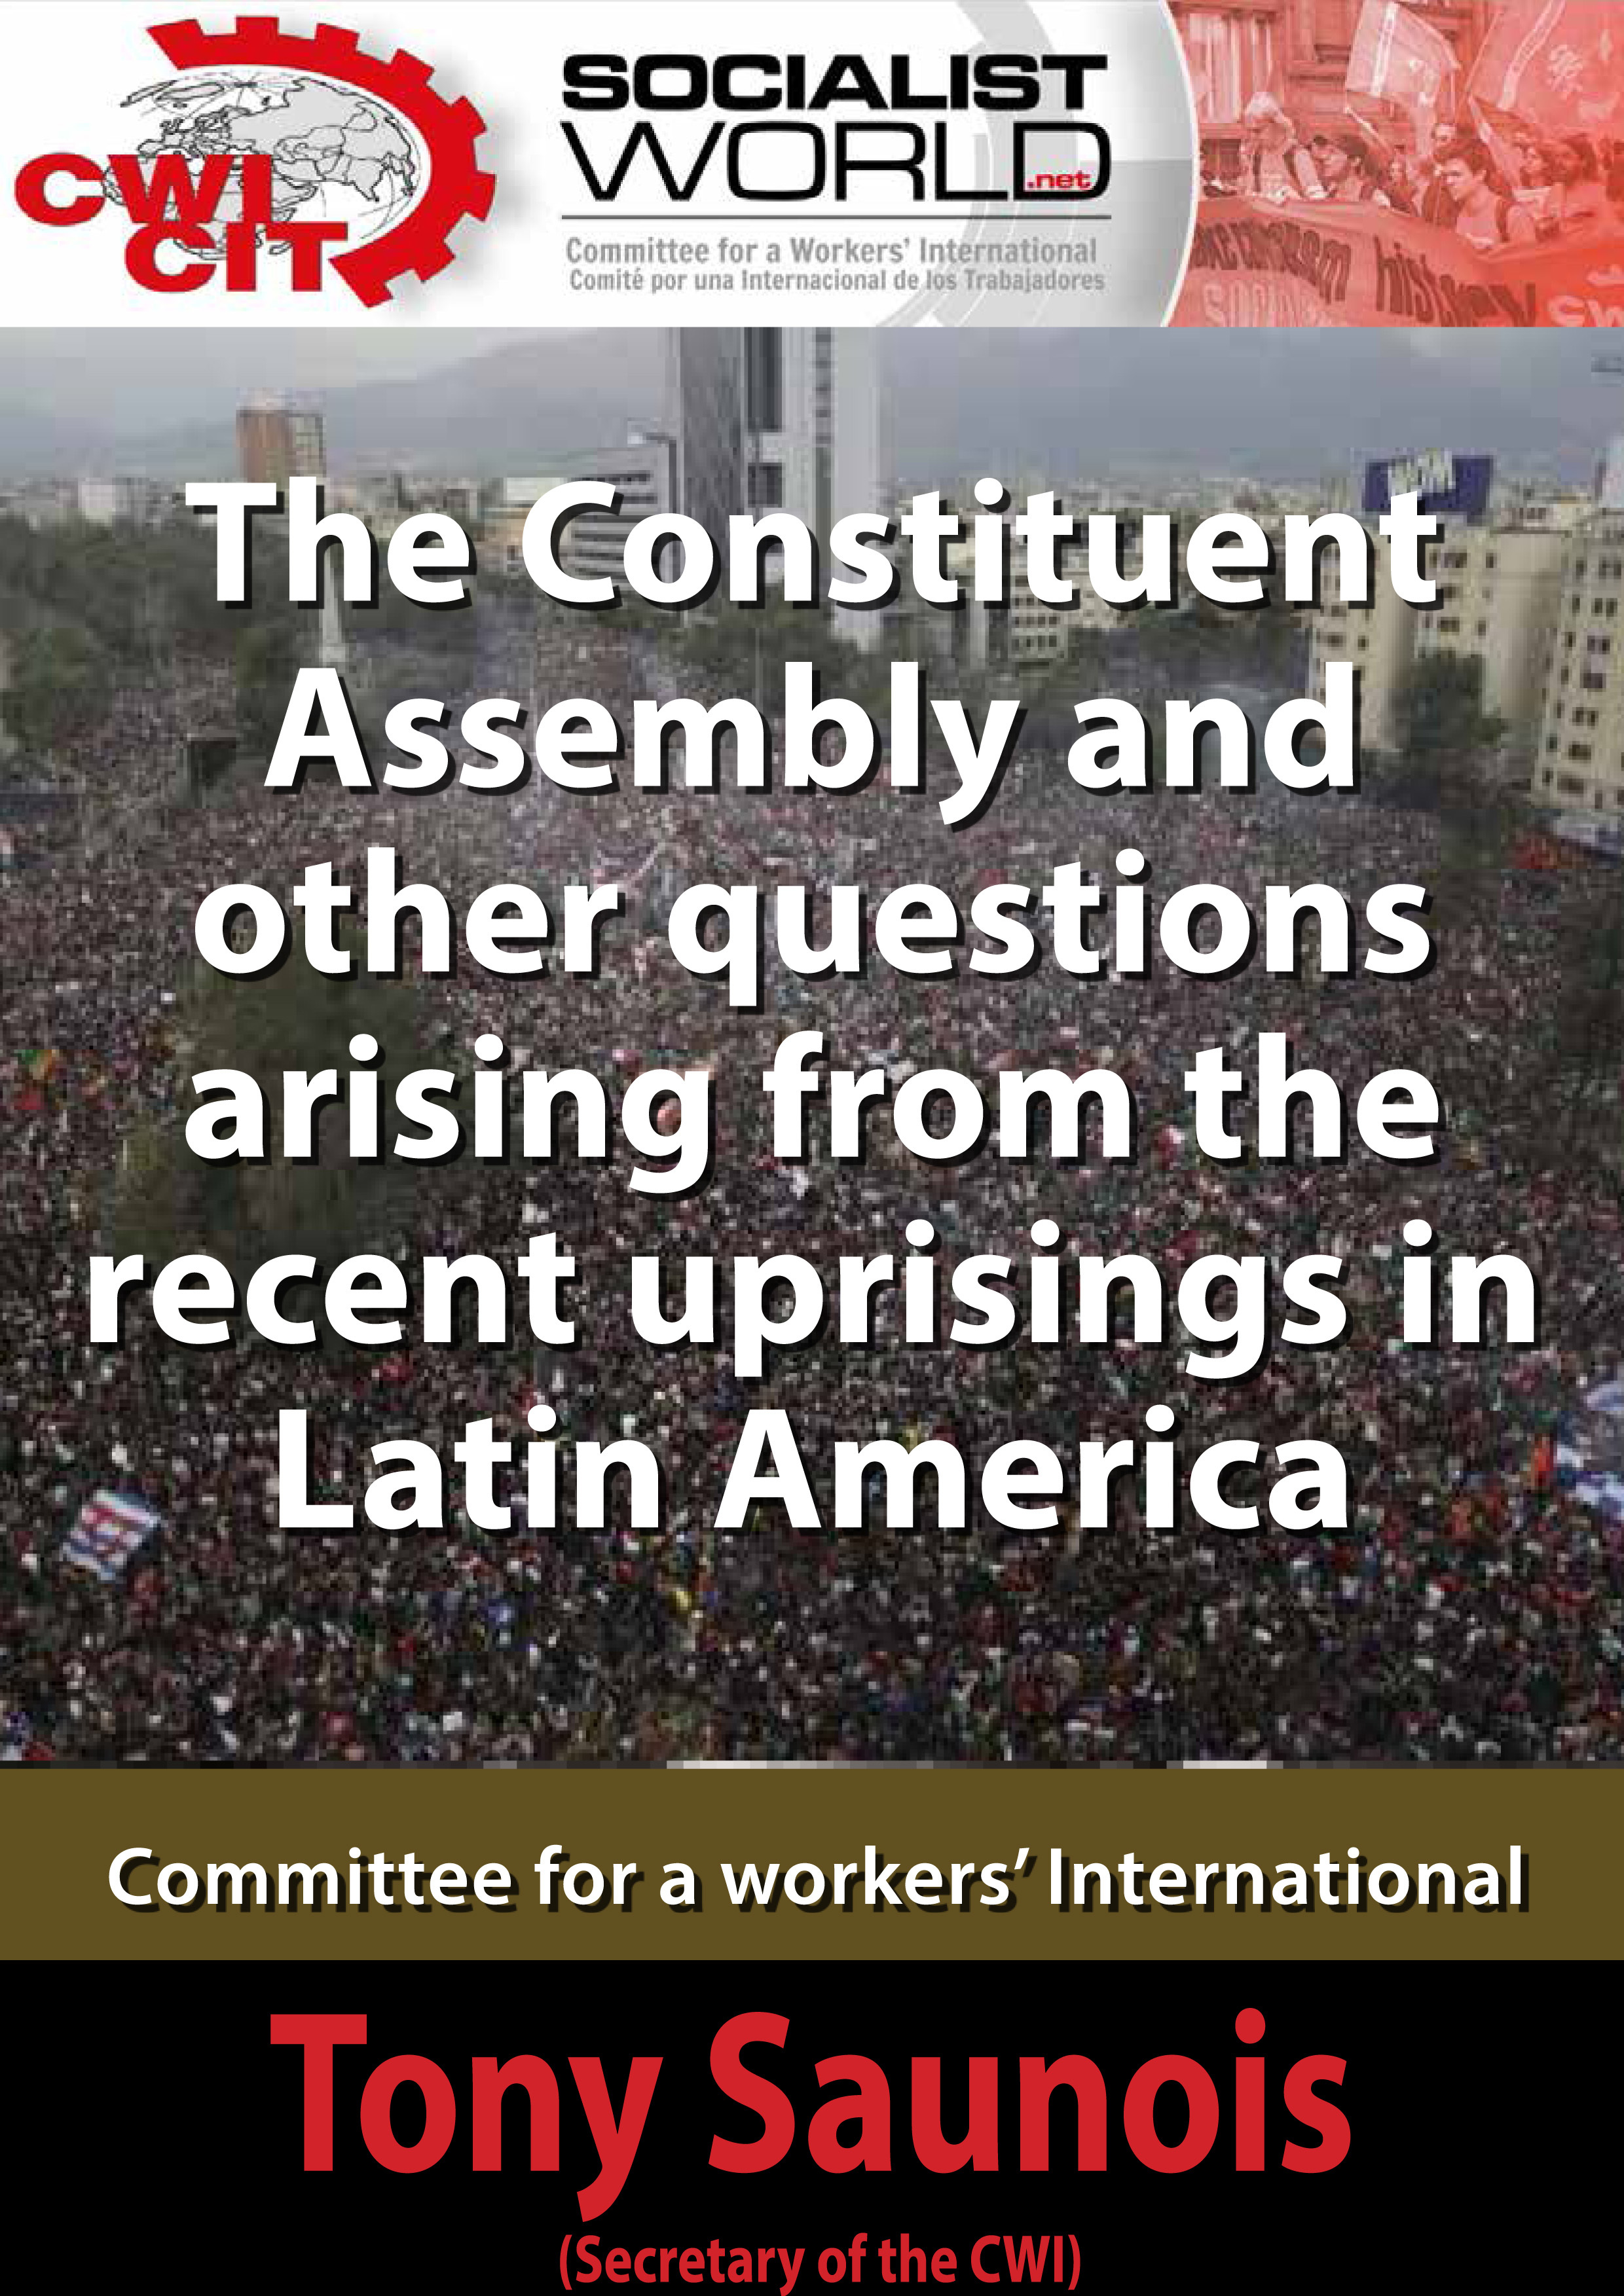 ConstituentAssembly